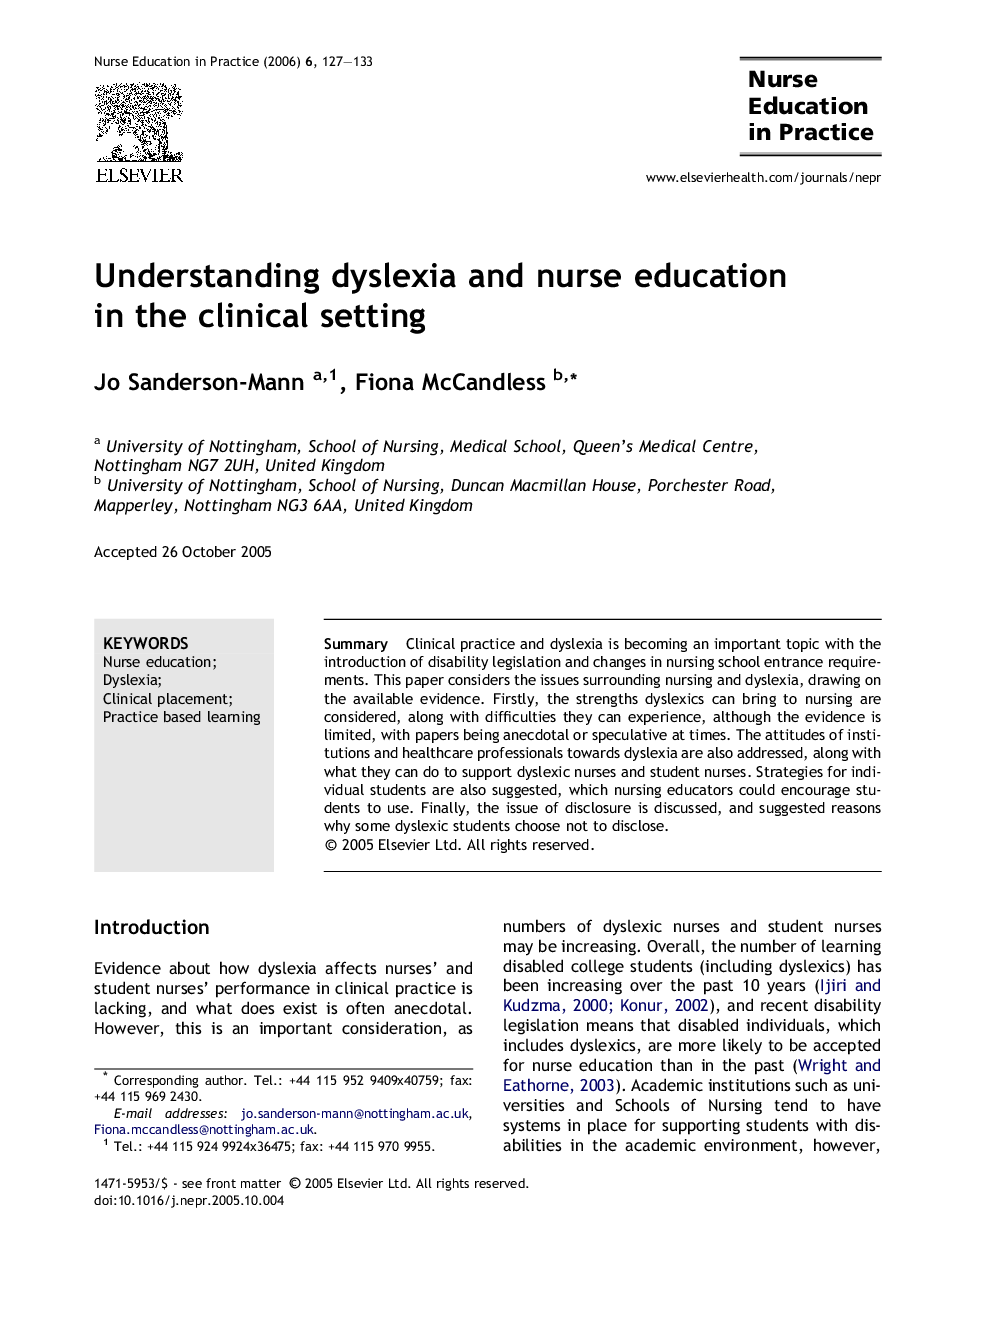 Understanding dyslexia and nurse education in the clinical setting